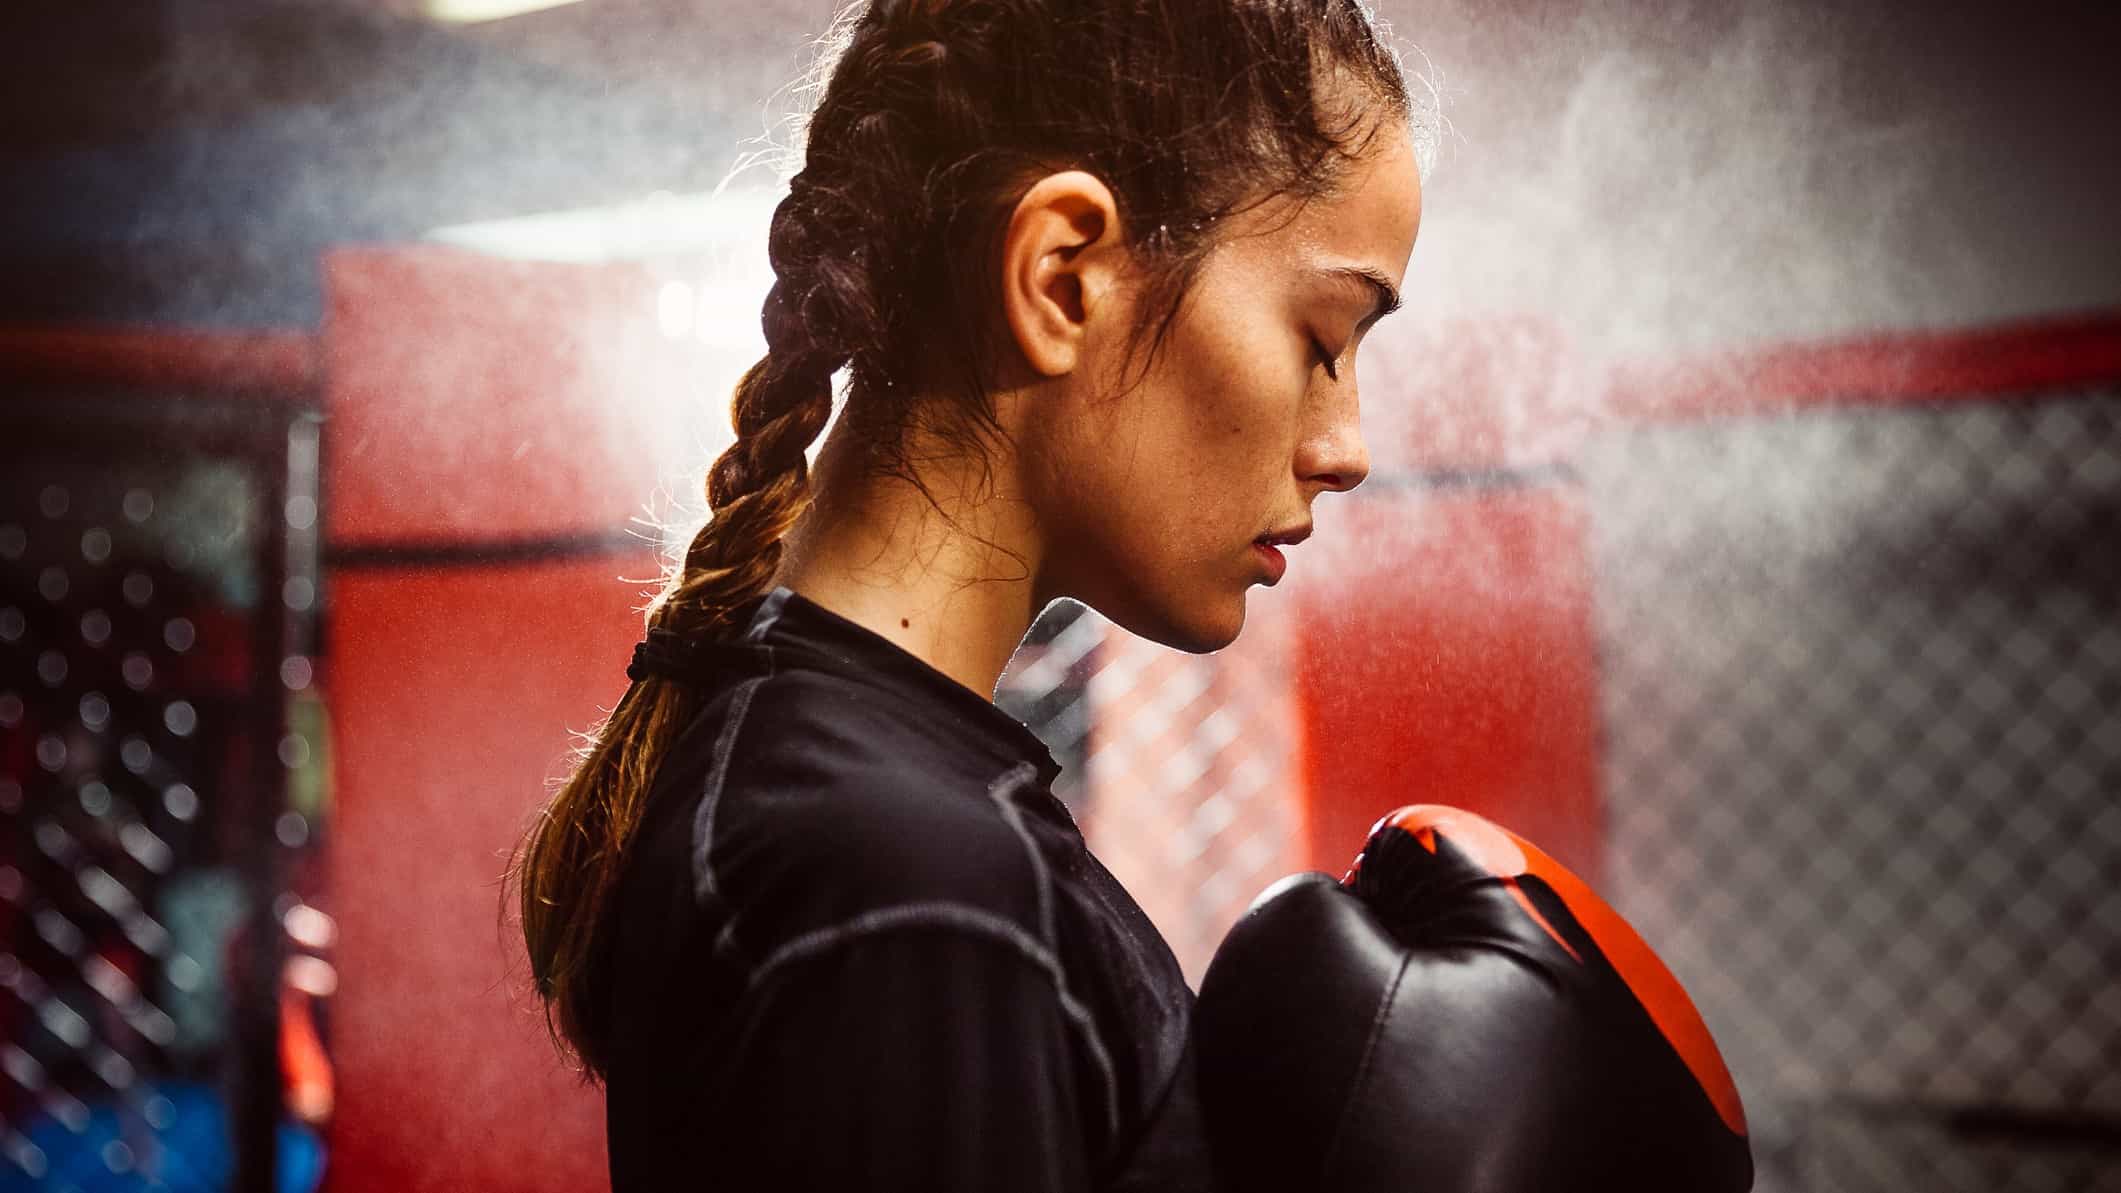 A female boxer focuses with her eyes closed, maintaining control of her thoughts.